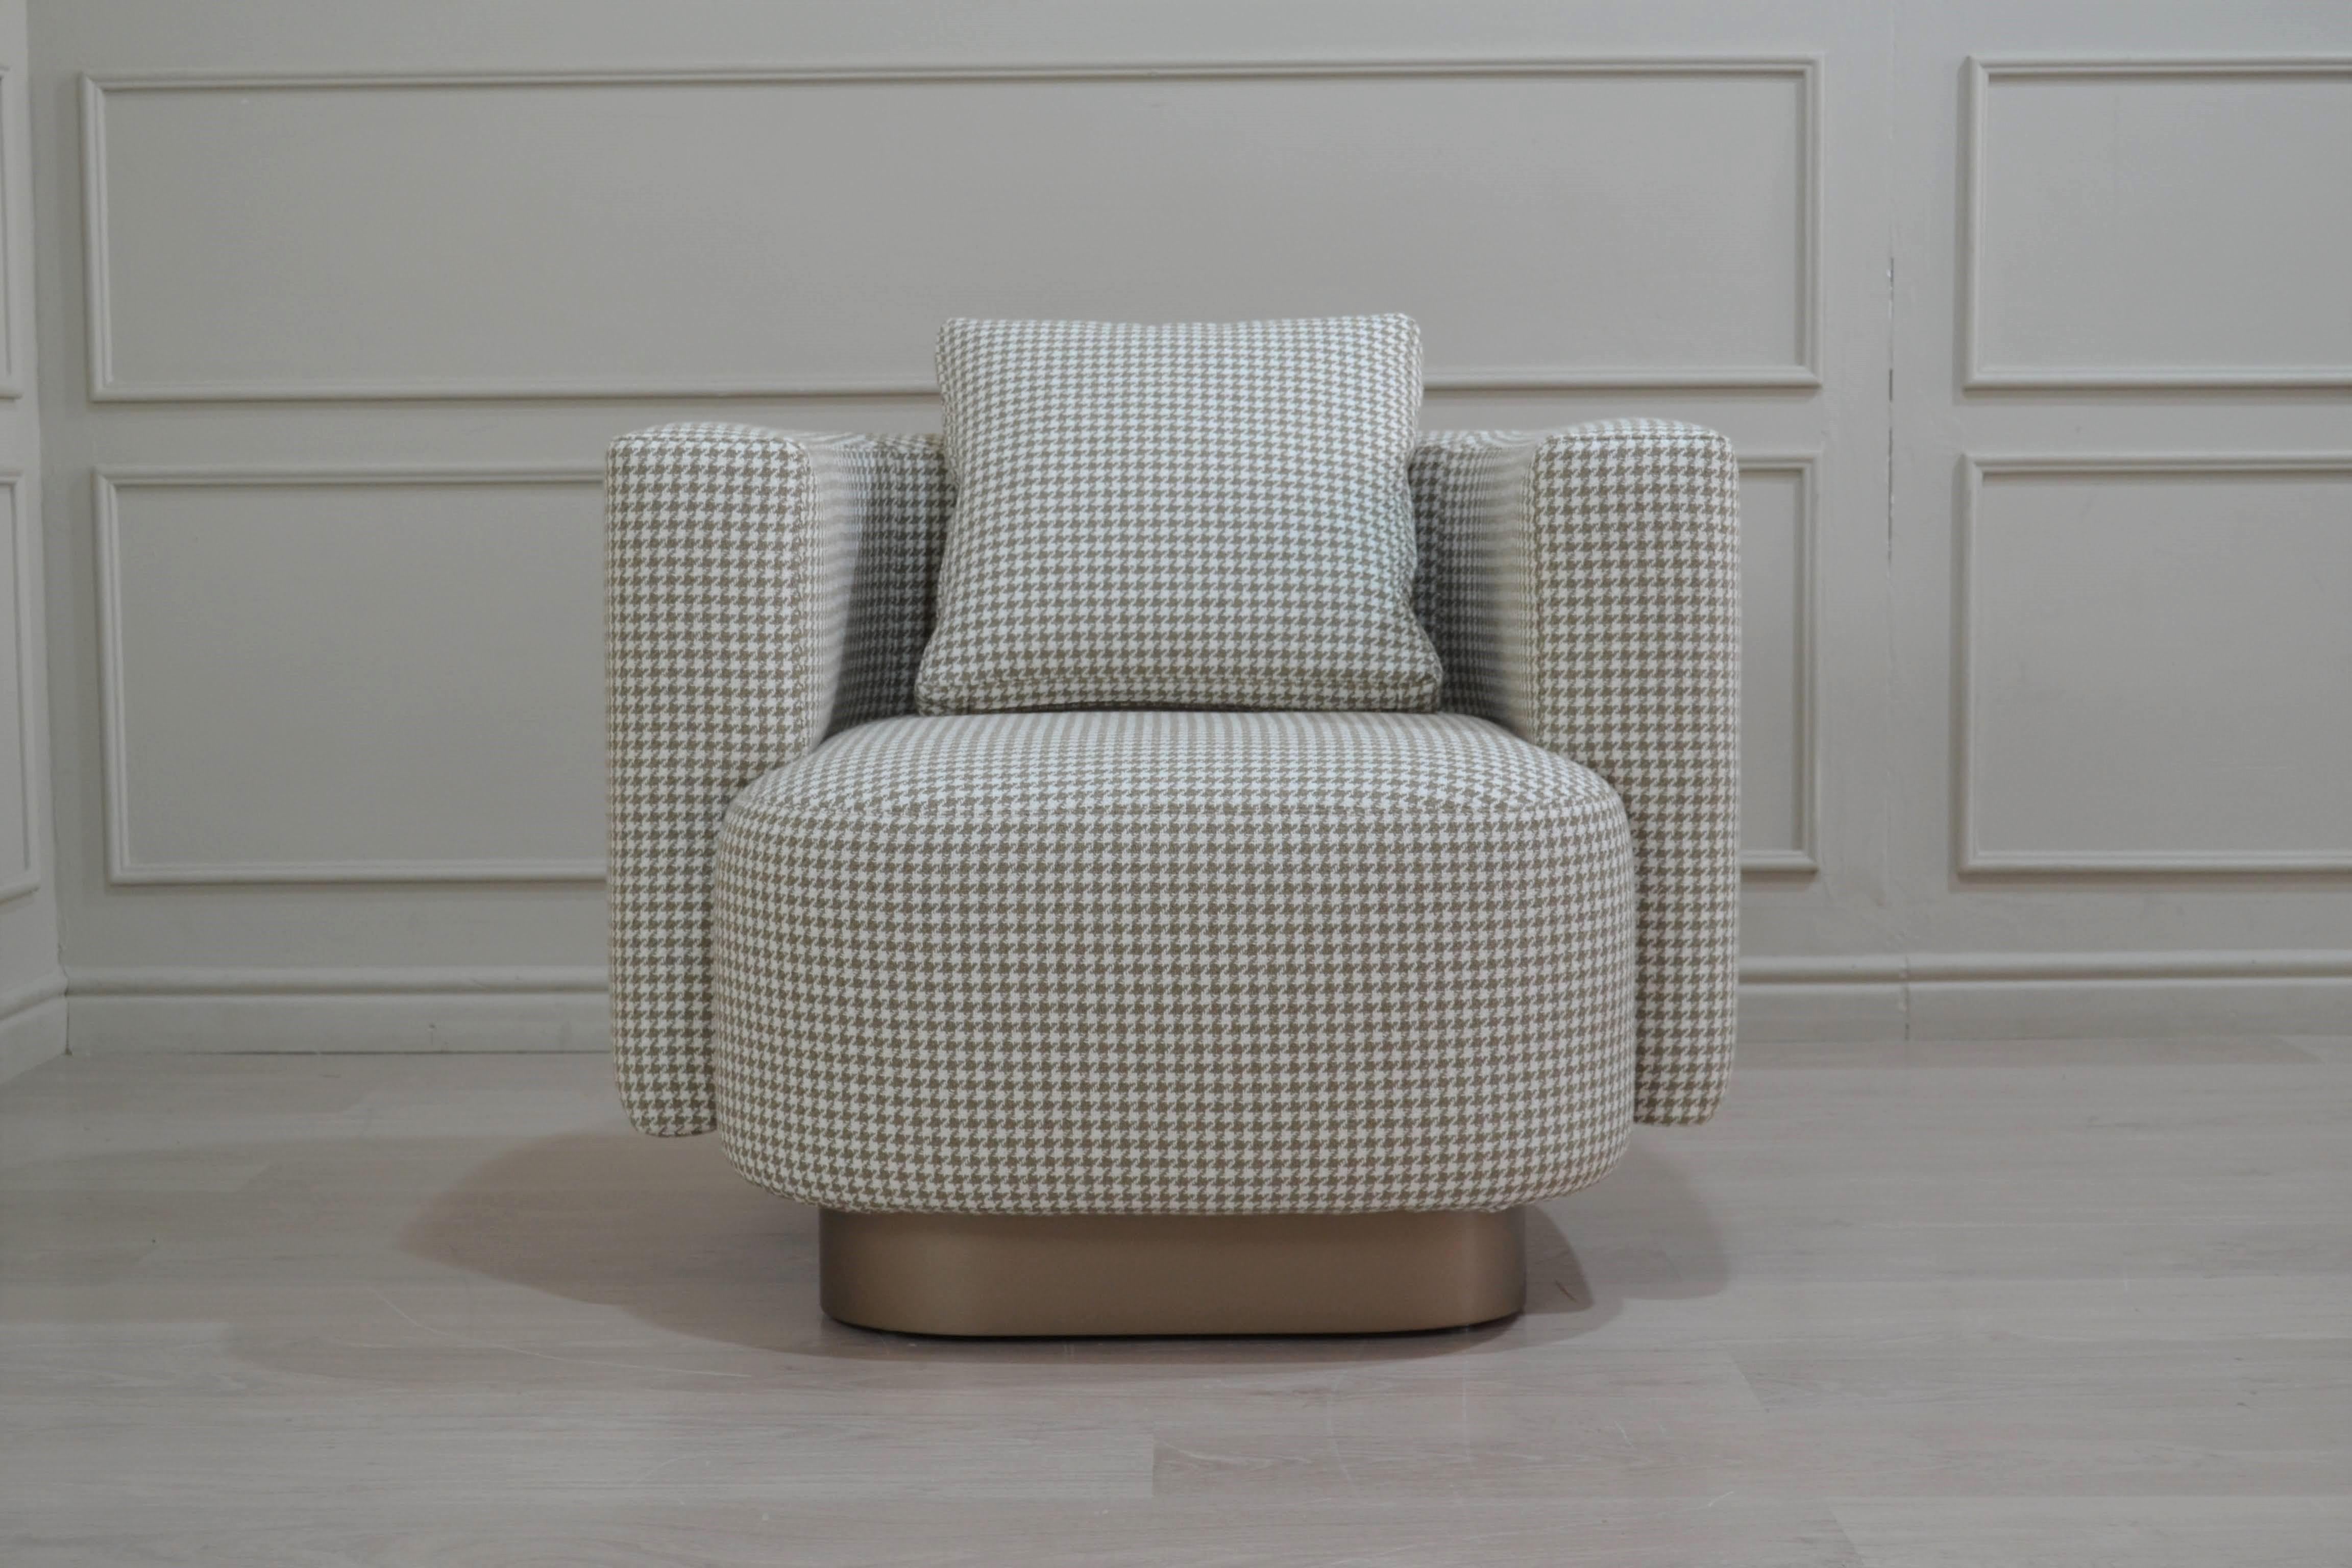 Italian Contemporary Lounge Upholstered Armchair in Gingham Pattern Fabric  For Sale 4